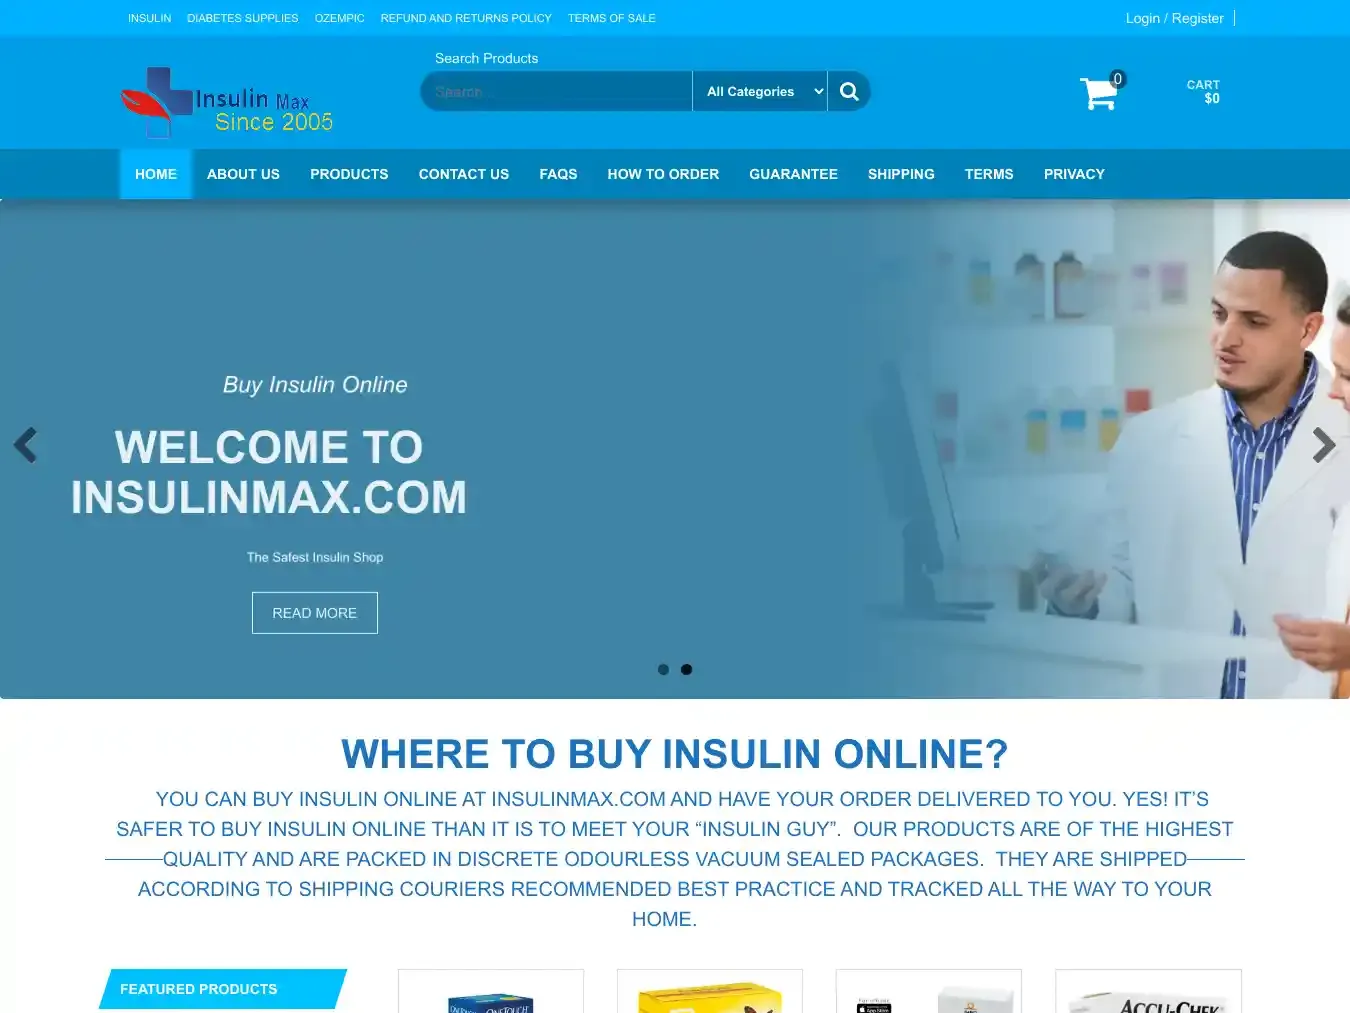 Insulinmax.com Fraudulent Non-Delivery website.